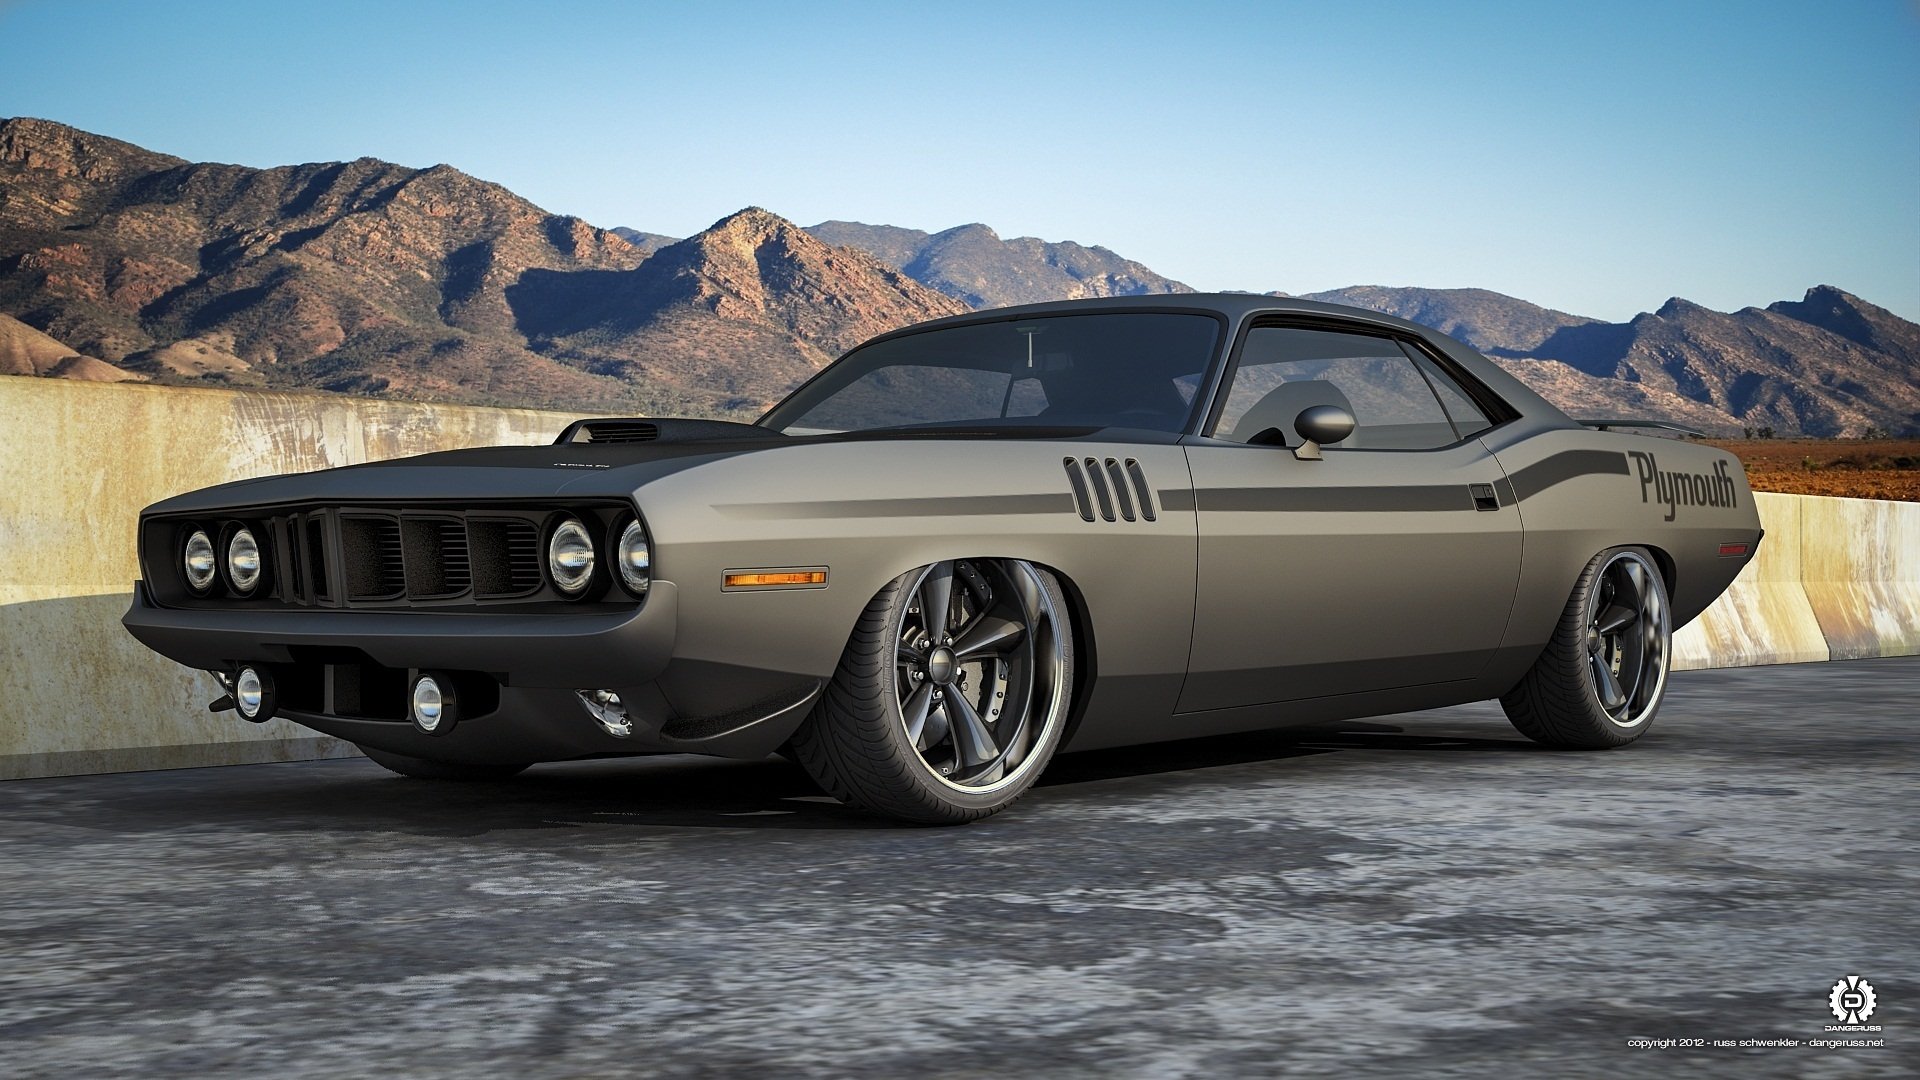 Plymouth Barracuda Full Hd Wallpaper And Background HD Wallpapers Download Free Images Wallpaper [wallpaper981.blogspot.com]